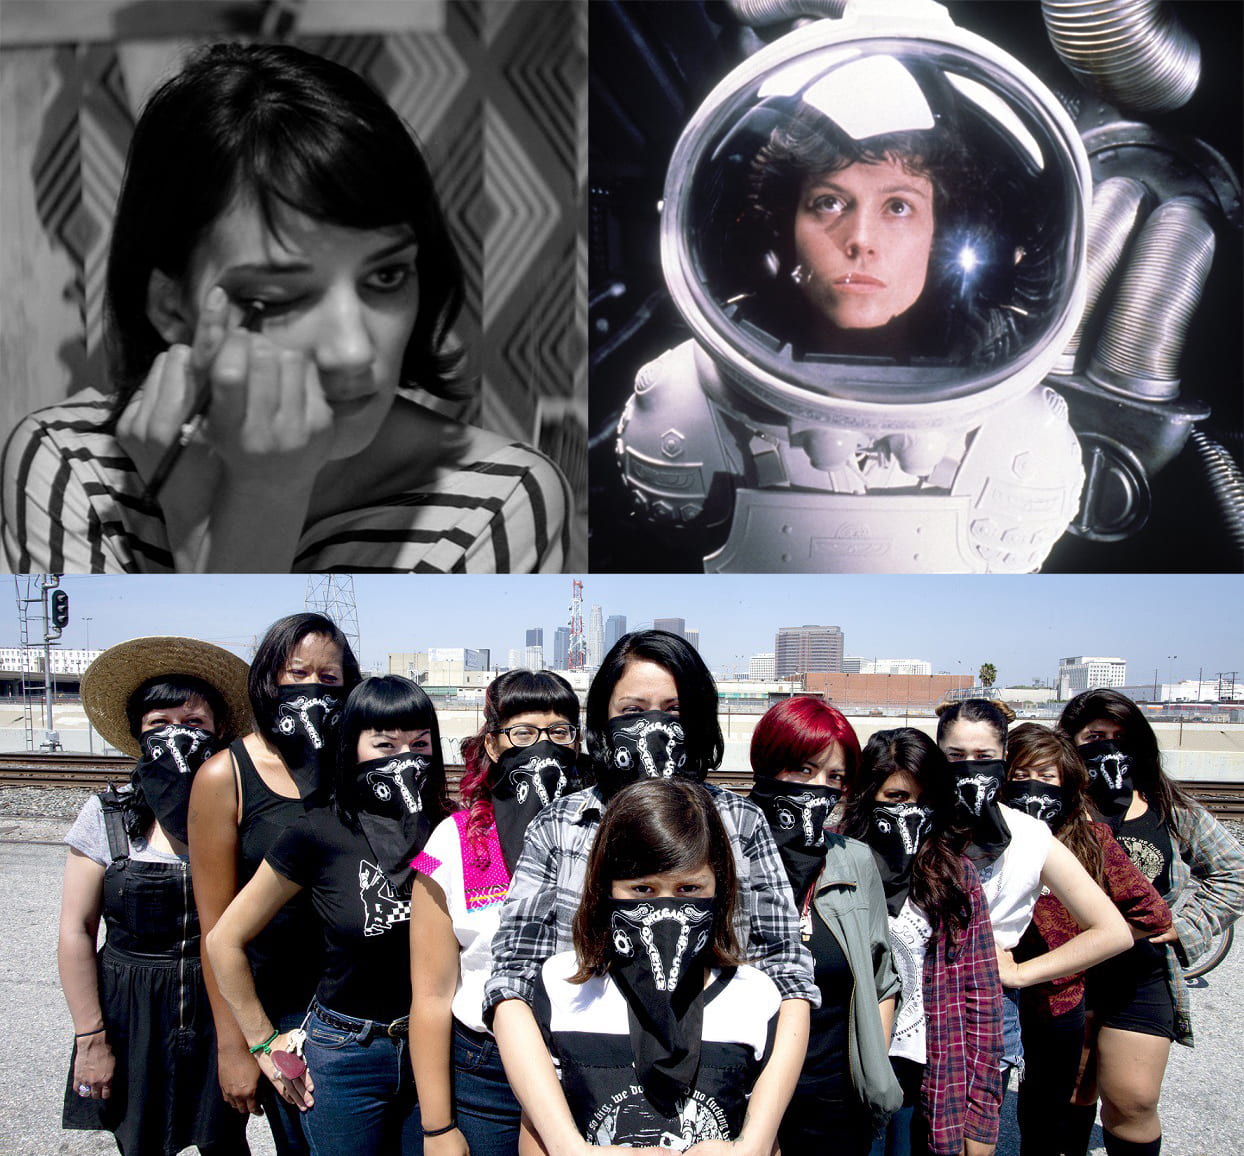 Still images from A Girl Walks Home Alone At Night, Alien, Ovarian Psycos